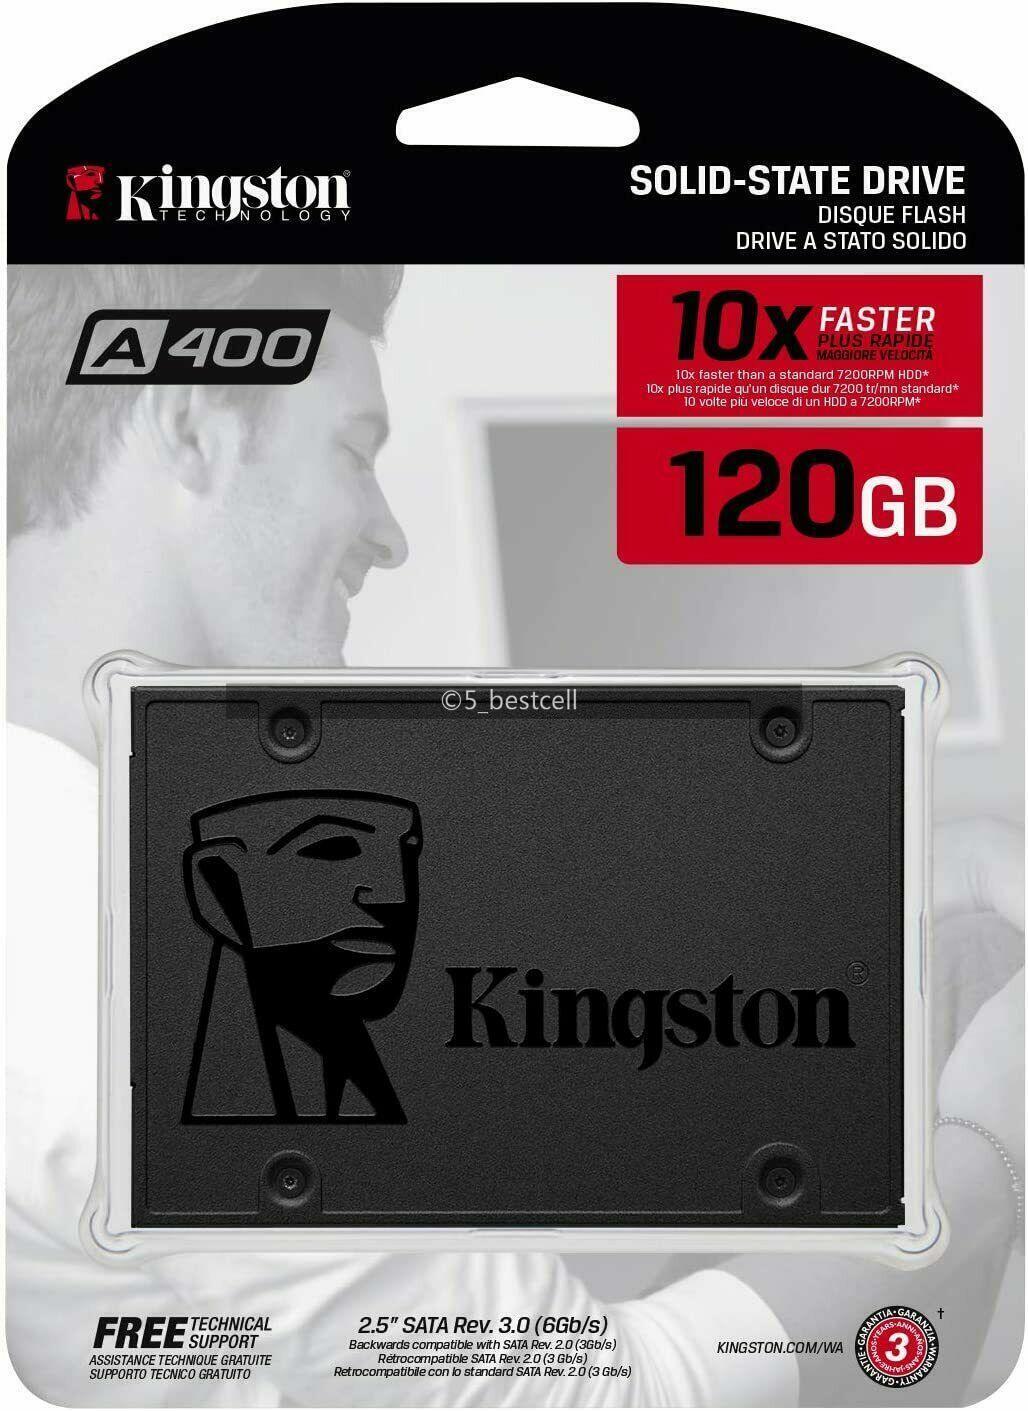 Kingston SSD A400 120GB Solid State Drive 2.5 inch SATA 3 Speeds up to 500MB/s